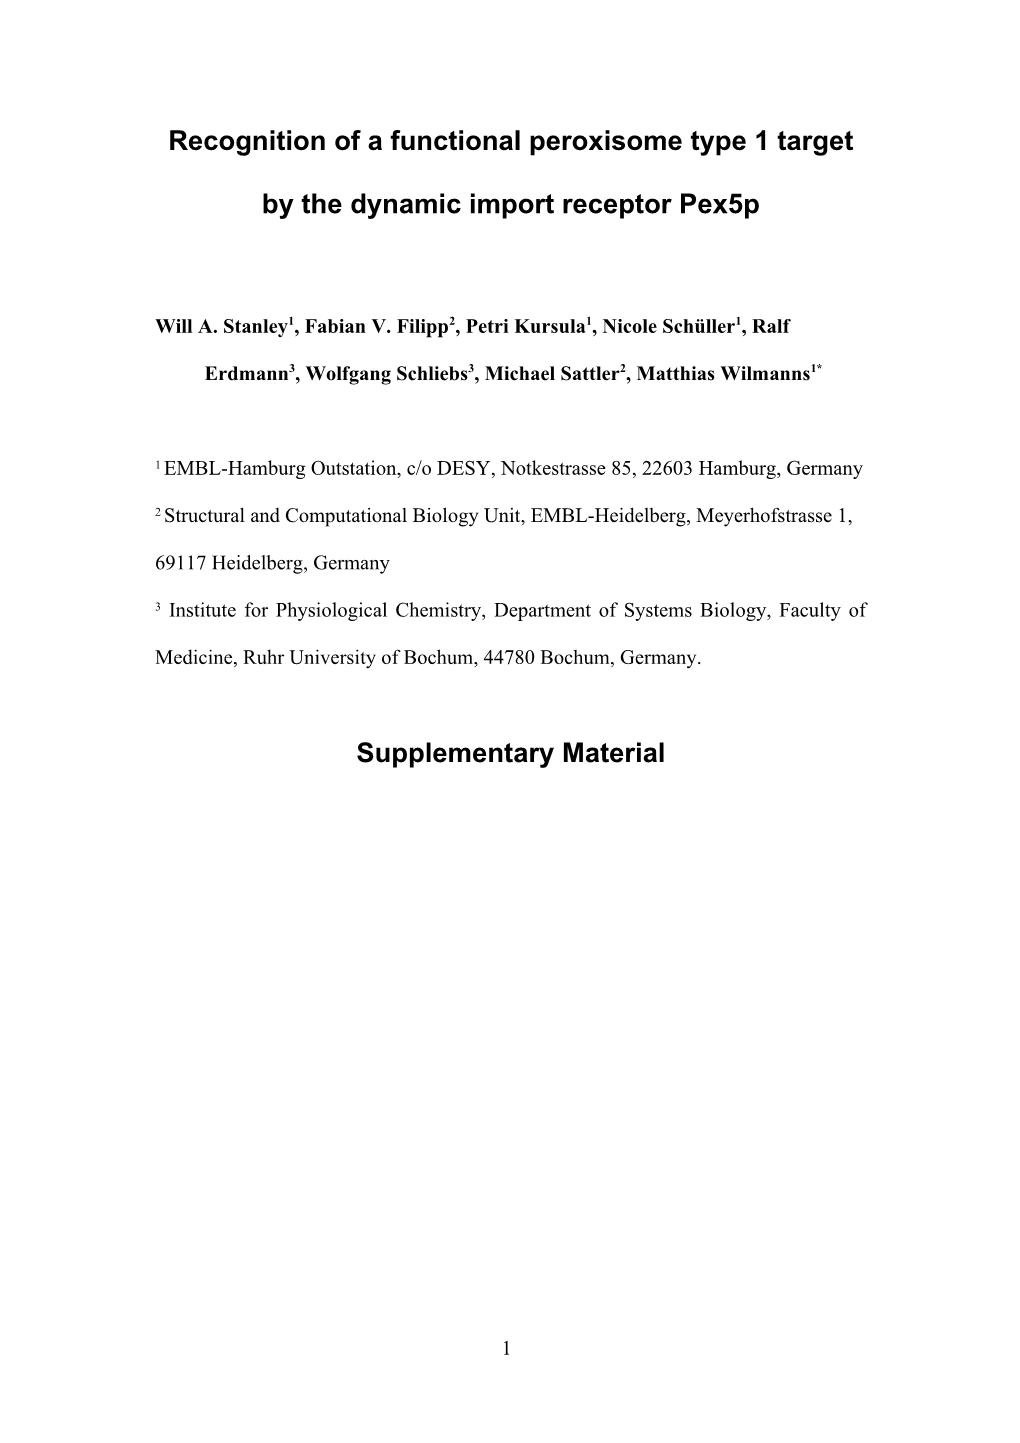 Supplementary Table 1: Crystallographic Statistics